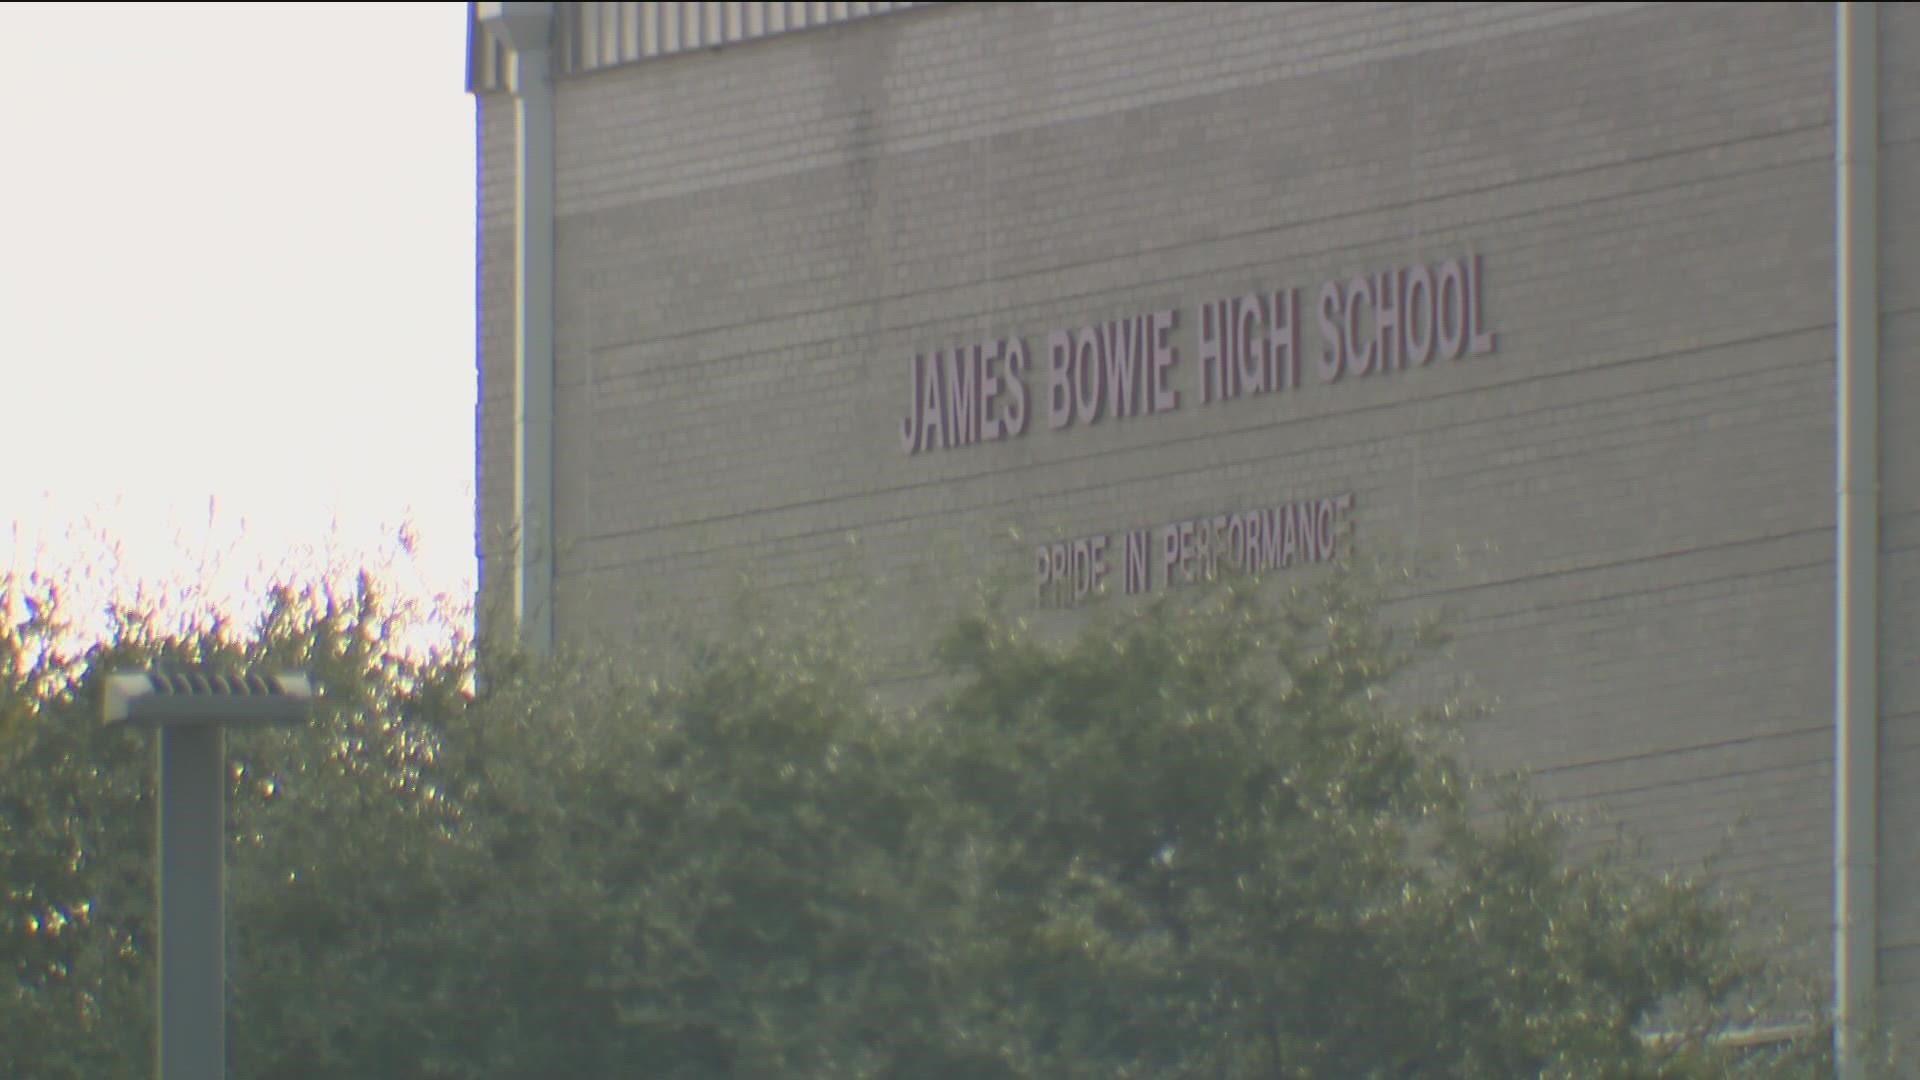 Parents and students are getting more anxious after reports of threats disrupt classes. District police departments say such threats are investigated for credibility